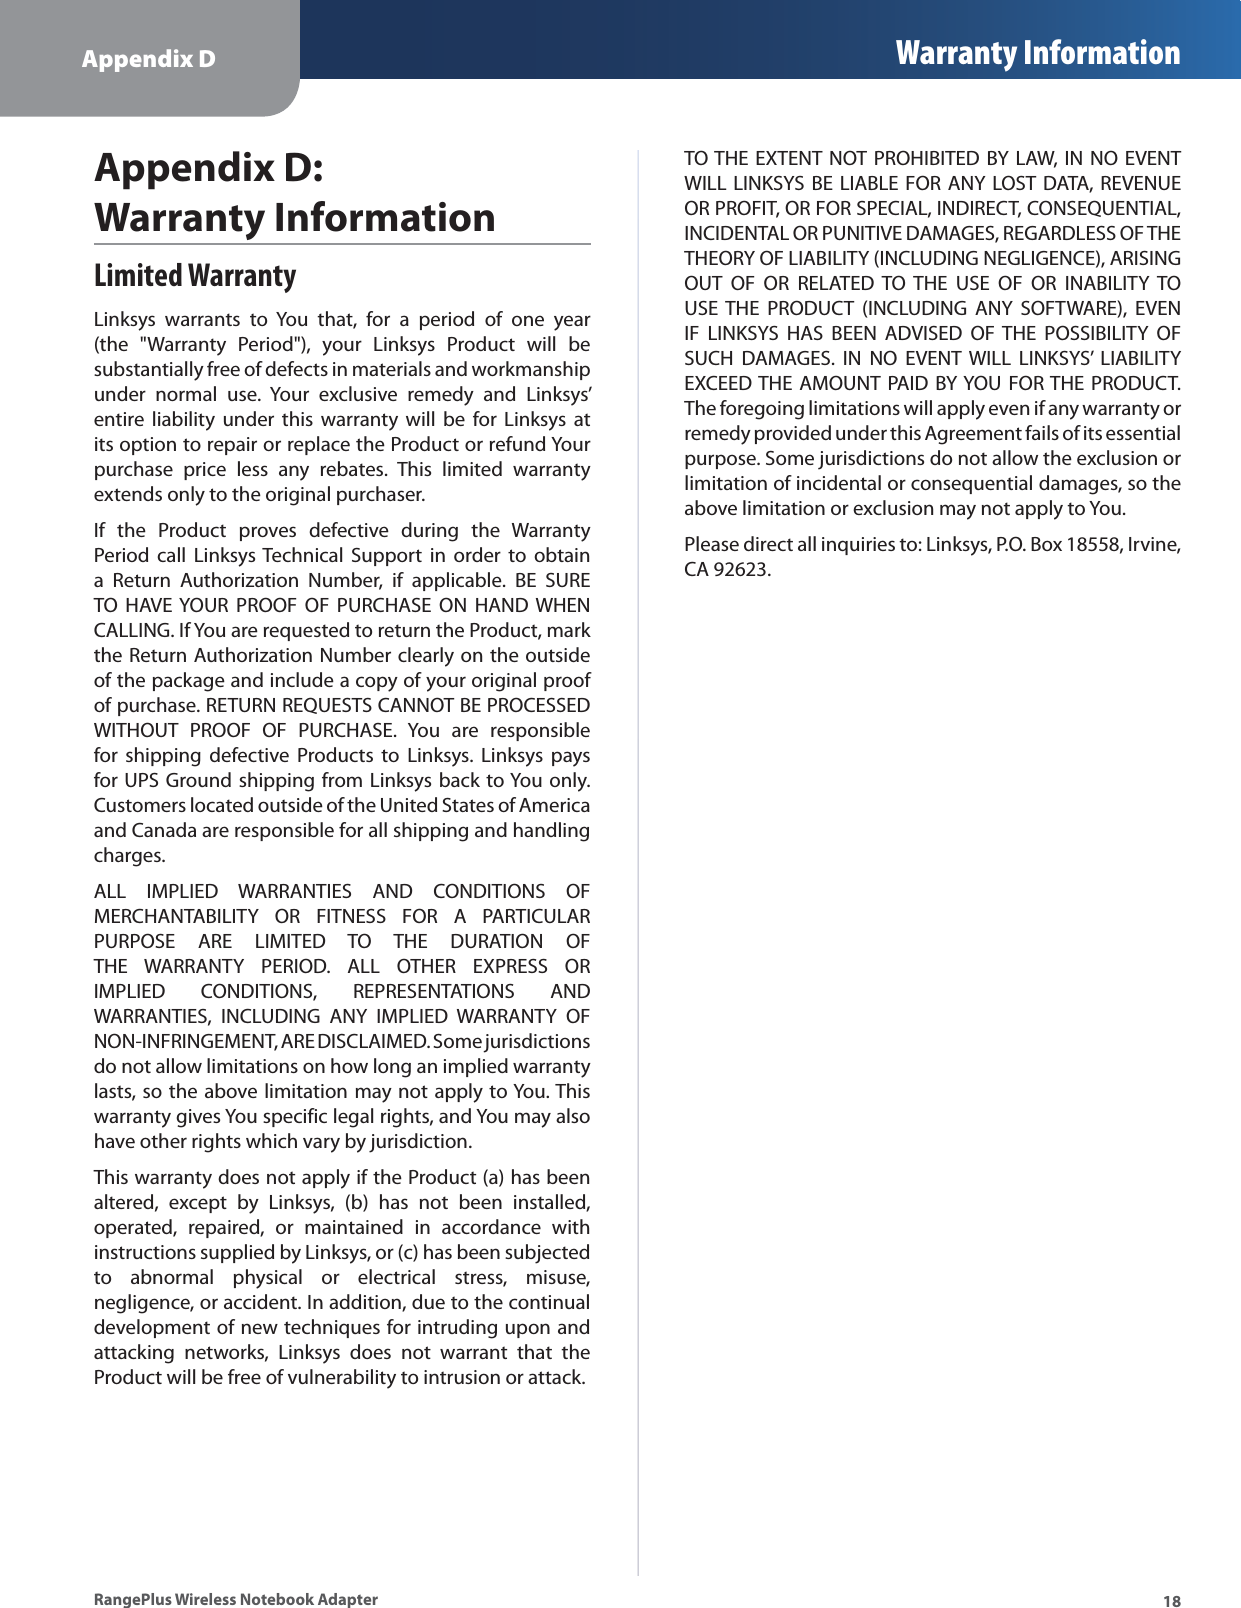 Appendix D Warranty Information18RangePlus Wireless Notebook AdapterLimited WarrantyLinksys warrants to You that, for a period of one year (the &quot;Warranty Period&quot;), your Linksys Product will be substantially free of defects in materials and workmanship under normal use. Your exclusive remedy and Linksys’ entire liability under this warranty will be for Linksys at its option to repair or replace the Product or refund Your purchase price less any rebates. This limited warranty extends only to the original purchaser. If the Product proves defective during the Warranty Period call Linksys Technical Support in order to obtain a Return Authorization Number, if applicable. BE SURE TO HAVE YOUR PROOF OF PURCHASE ON HAND WHEN CALLING. If You are requested to return the Product, mark the Return Authorization Number clearly on the outside of the package and include a copy of your original proof of purchase. RETURN REQUESTS CANNOT BE PROCESSED WITHOUT PROOF OF PURCHASE. You are responsible for shipping defective Products to Linksys. Linksys pays for UPS Ground shipping from Linksys back to You only. Customers located outside of the United States of America and Canada are responsible for all shipping and handling charges. ALL IMPLIED WARRANTIES AND CONDITIONS OF MERCHANTABILITY OR FITNESS FOR A PARTICULAR PURPOSE ARE LIMITED TO THE DURATION OF THE WARRANTY PERIOD. ALL OTHER EXPRESS OR IMPLIED CONDITIONS, REPRESENTATIONS AND WARRANTIES, INCLUDING ANY IMPLIED WARRANTY OF NON-INFRINGEMENT, ARE DISCLAIMED. Some jurisdictions do not allow limitations on how long an implied warranty lasts, so the above limitation may not apply to You. This warranty gives You specific legal rights, and You may also have other rights which vary by jurisdiction.This warranty does not apply if the Product (a) has been altered, except by Linksys, (b) has not been installed, operated, repaired, or maintained in accordance with instructions supplied by Linksys, or (c) has been subjected to abnormal physical or electrical stress, misuse, negligence, or accident. In addition, due to the continual development of new techniques for intruding upon and attacking networks, Linksys does not warrant that the Product will be free of vulnerability to intrusion or attack.TO THE EXTENT NOT PROHIBITED BY LAW, IN NO EVENT WILL LINKSYS BE LIABLE FOR ANY LOST DATA, REVENUE OR PROFIT, OR FOR SPECIAL, INDIRECT, CONSEQUENTIAL, INCIDENTAL OR PUNITIVE DAMAGES, REGARDLESS OF THE THEORY OF LIABILITY (INCLUDING NEGLIGENCE), ARISING OUT OF OR RELATED TO THE USE OF OR INABILITY TO USE THE PRODUCT (INCLUDING ANY SOFTWARE), EVEN IF LINKSYS HAS BEEN ADVISED OF THE POSSIBILITY OF SUCH DAMAGES. IN NO EVENT WILL LINKSYS’ LIABILITY EXCEED THE AMOUNT PAID BY YOU FOR THE PRODUCT. The foregoing limitations will apply even if any warranty or remedy provided under this Agreement fails of its essential purpose. Some jurisdictions do not allow the exclusion or limitation of incidental or consequential damages, so the above limitation or exclusion may not apply to You.Please direct all inquiries to: Linksys, P.O. Box 18558, Irvine, CA 92623.Appendix D: Warranty Information